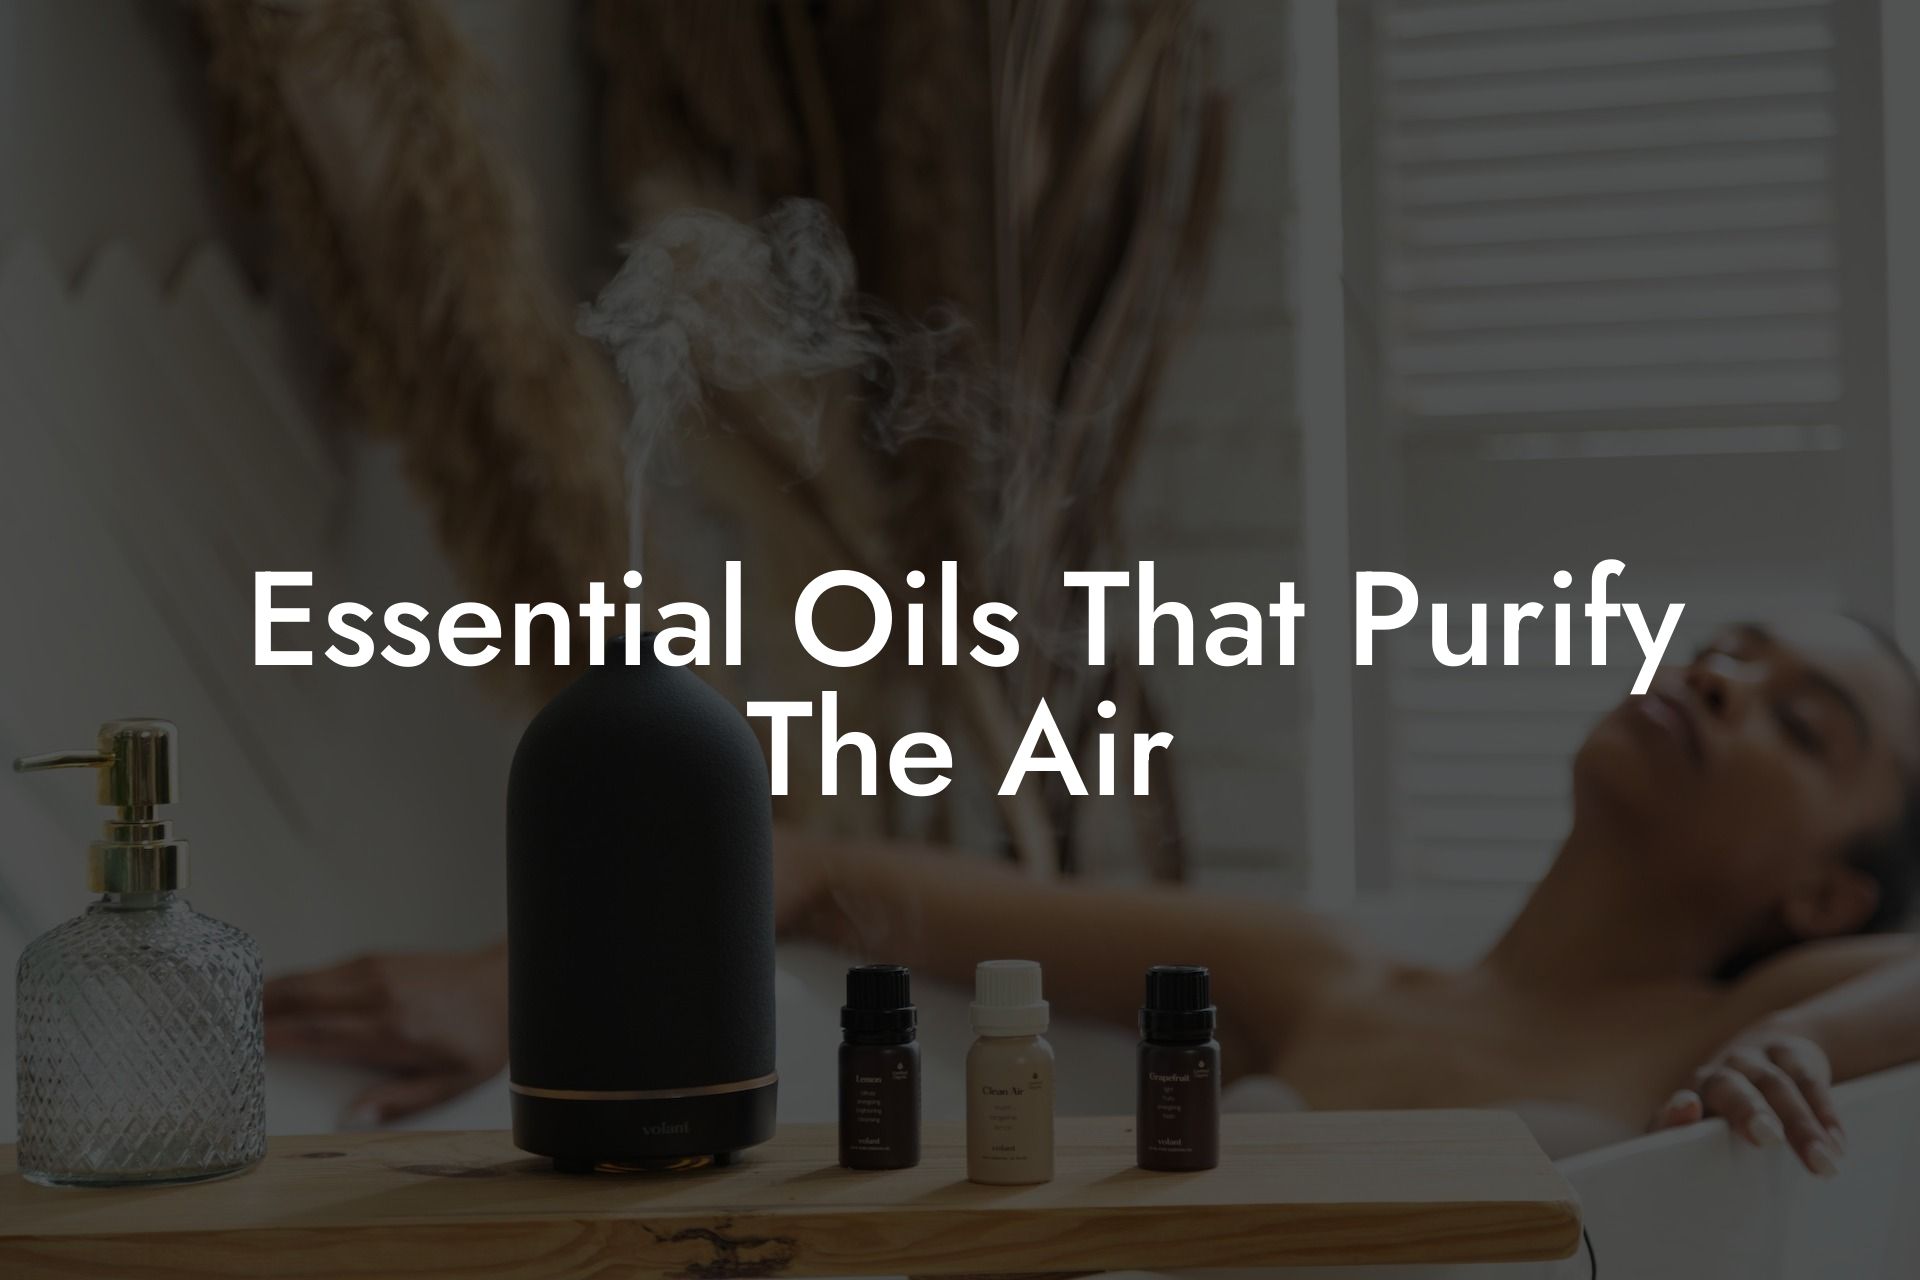 Essential Oils That Purify The Air